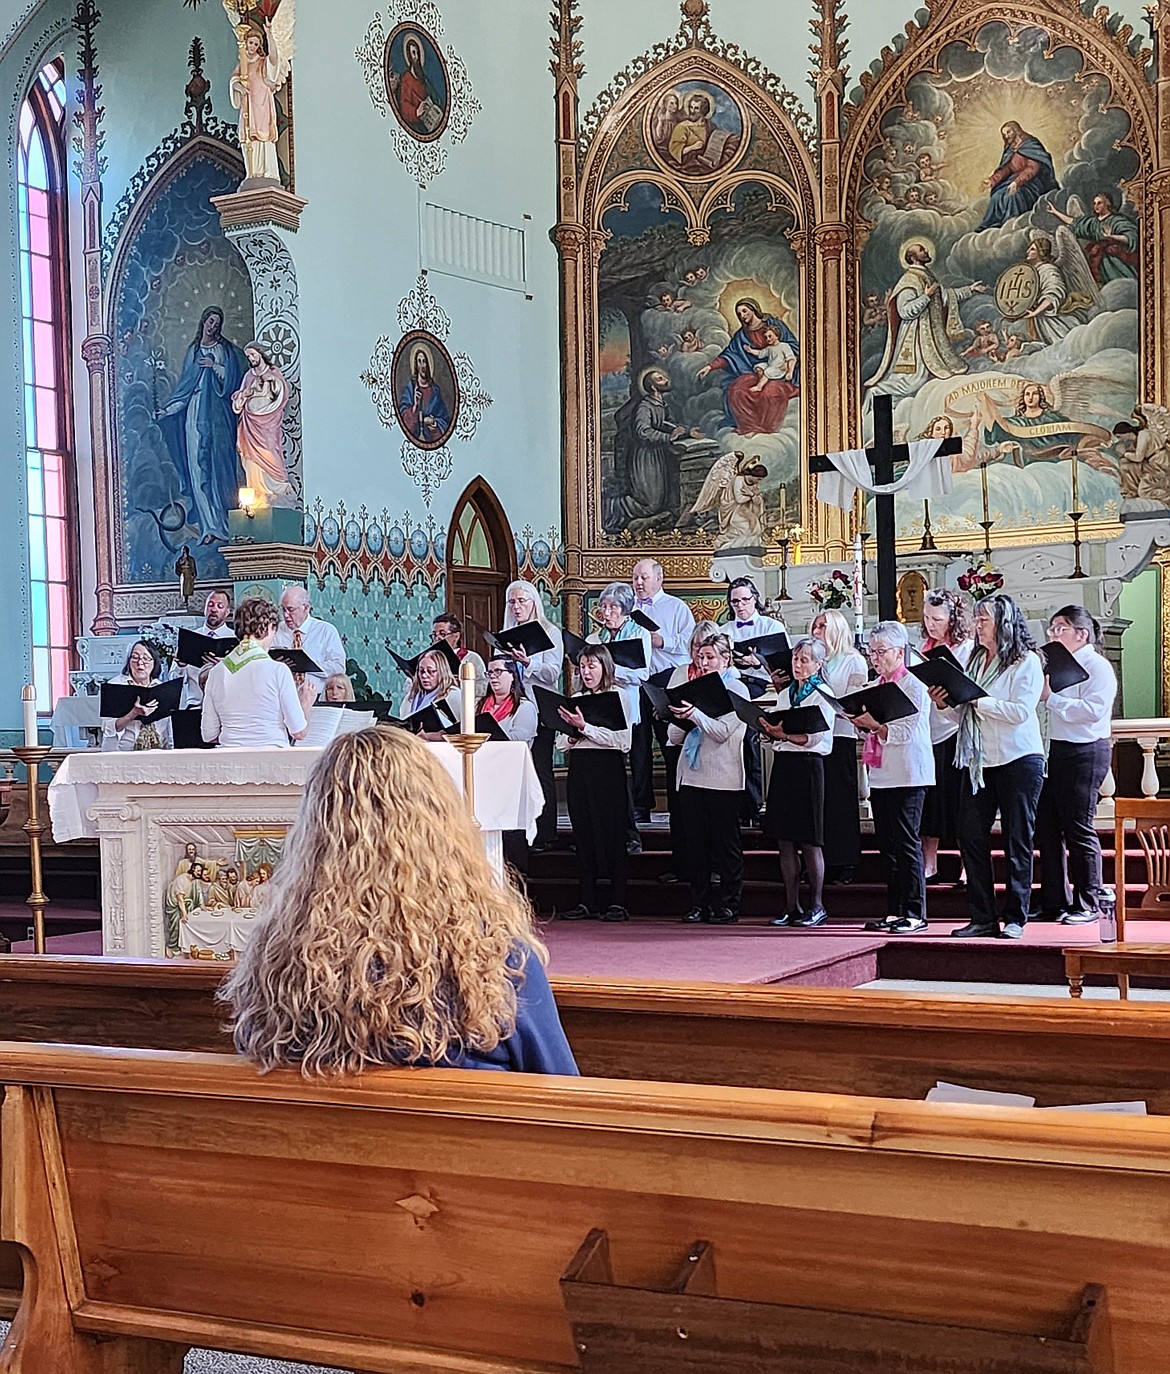 The Mission Valley Choral Society blends voices in a concert last weekend at the majestic St. Ignatius Mission. (Berl Tiskus/Leader)